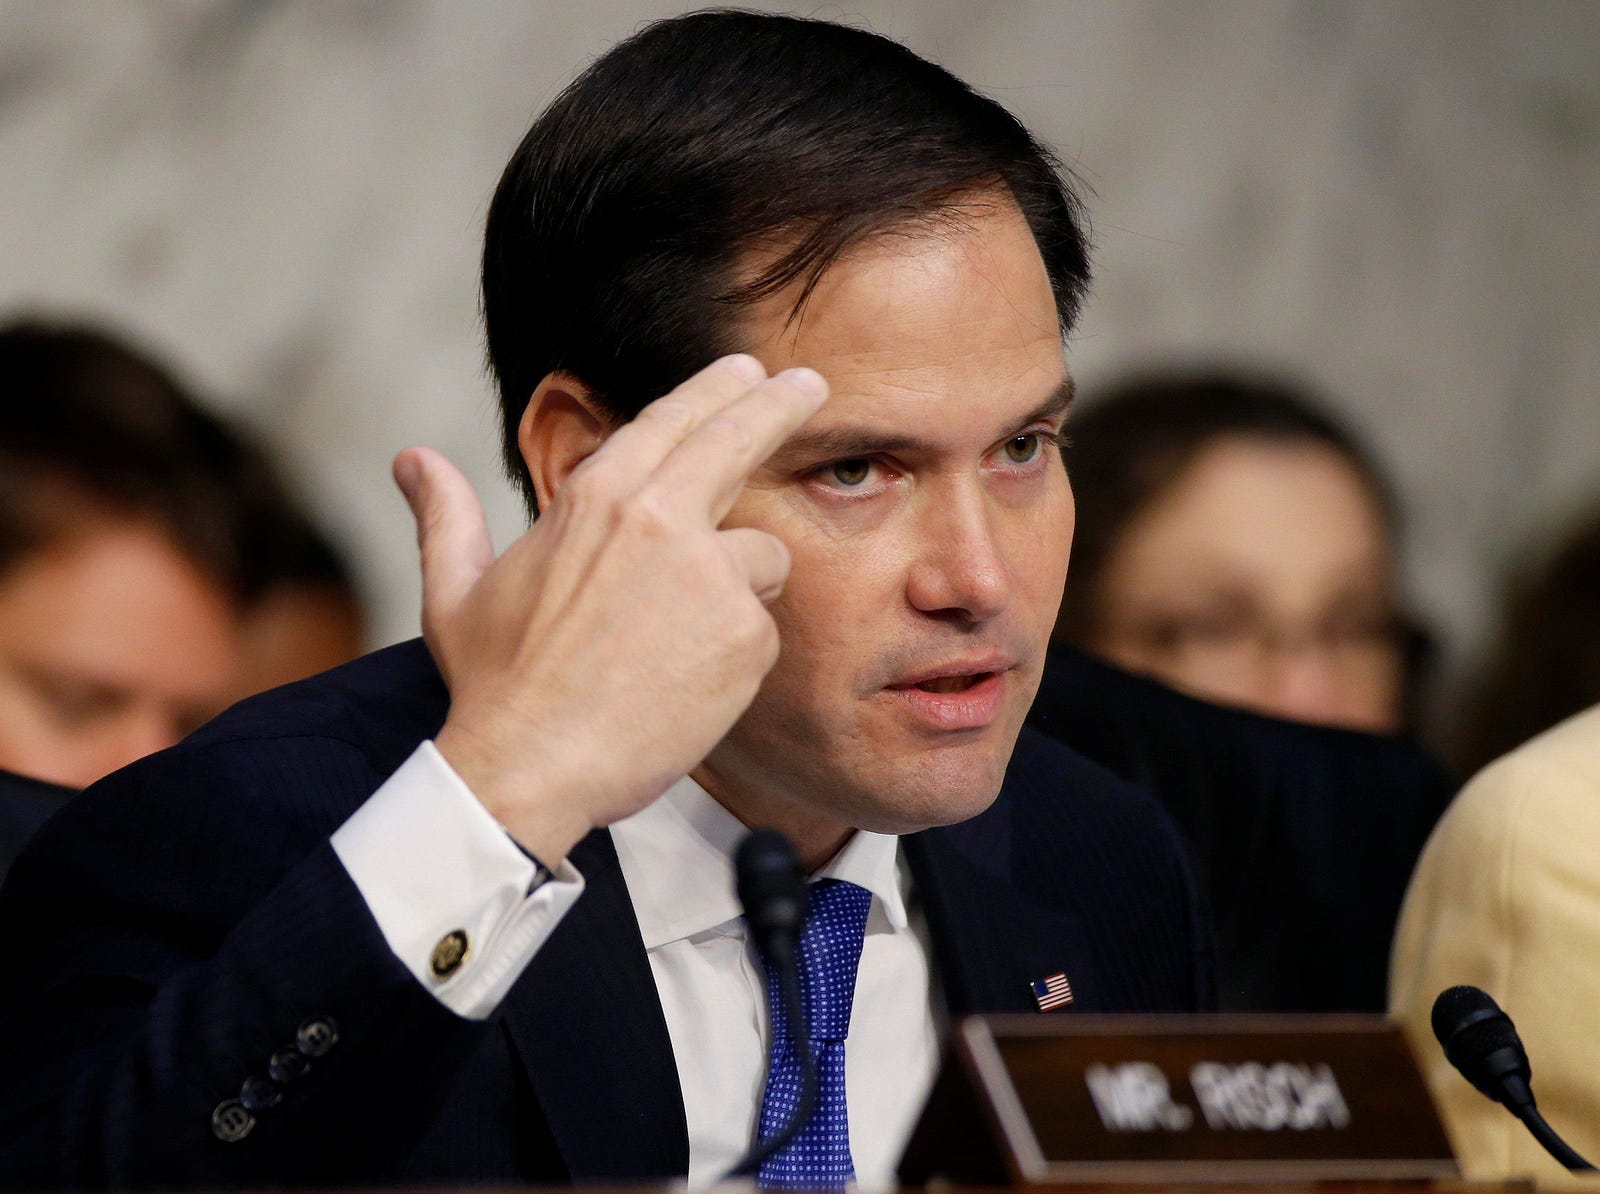 in which marco rubio reminds us about the restorative power of words